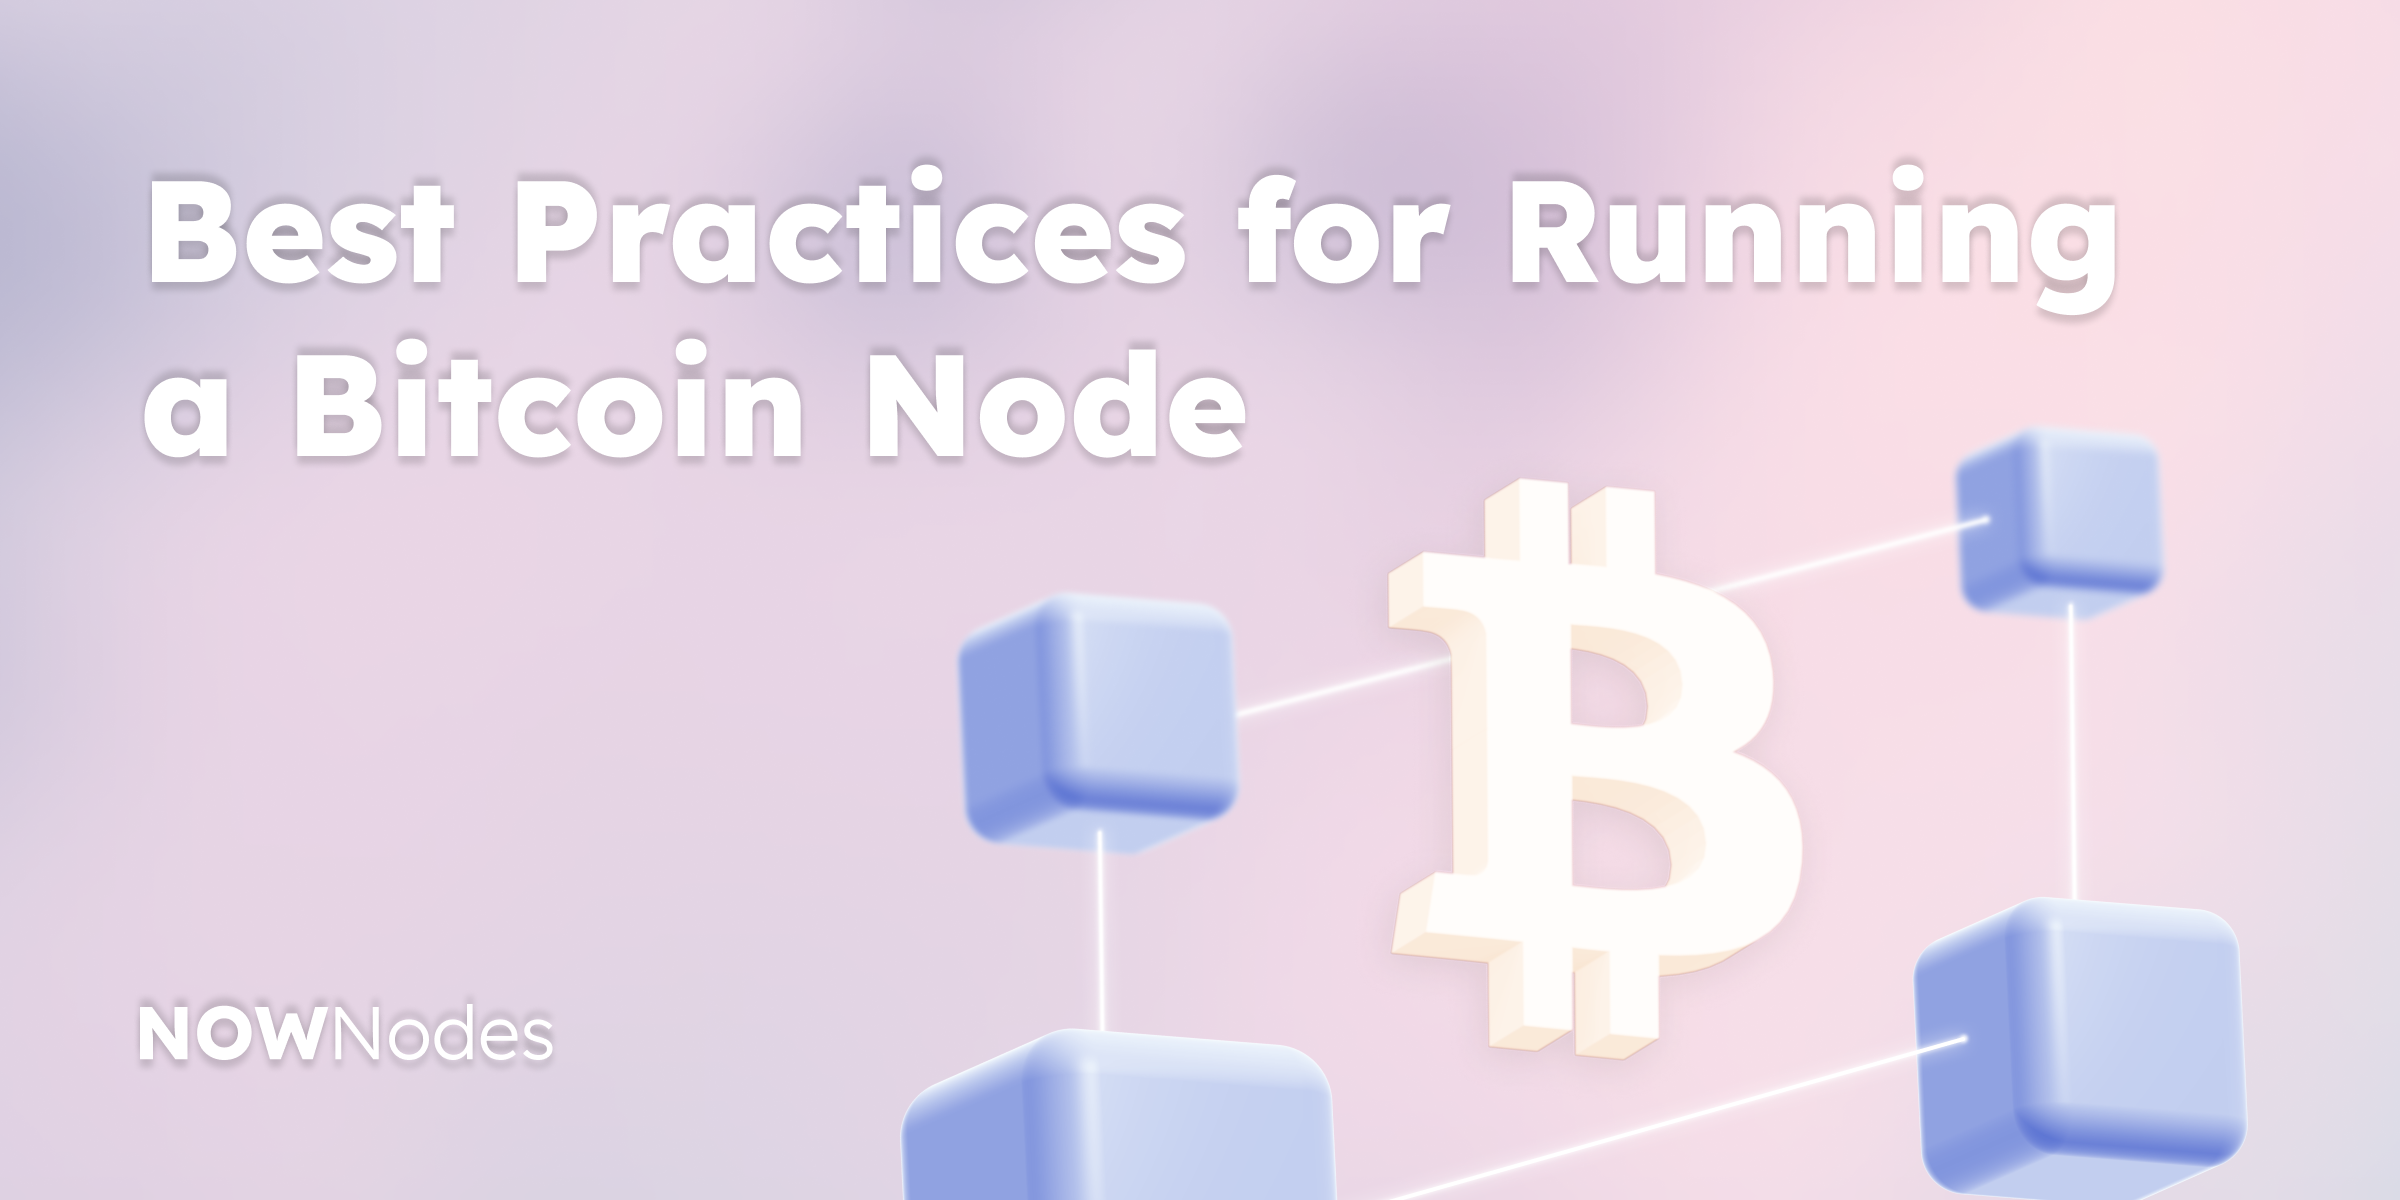 NOWNodes
Best Practices for Running a Bitcoin Node